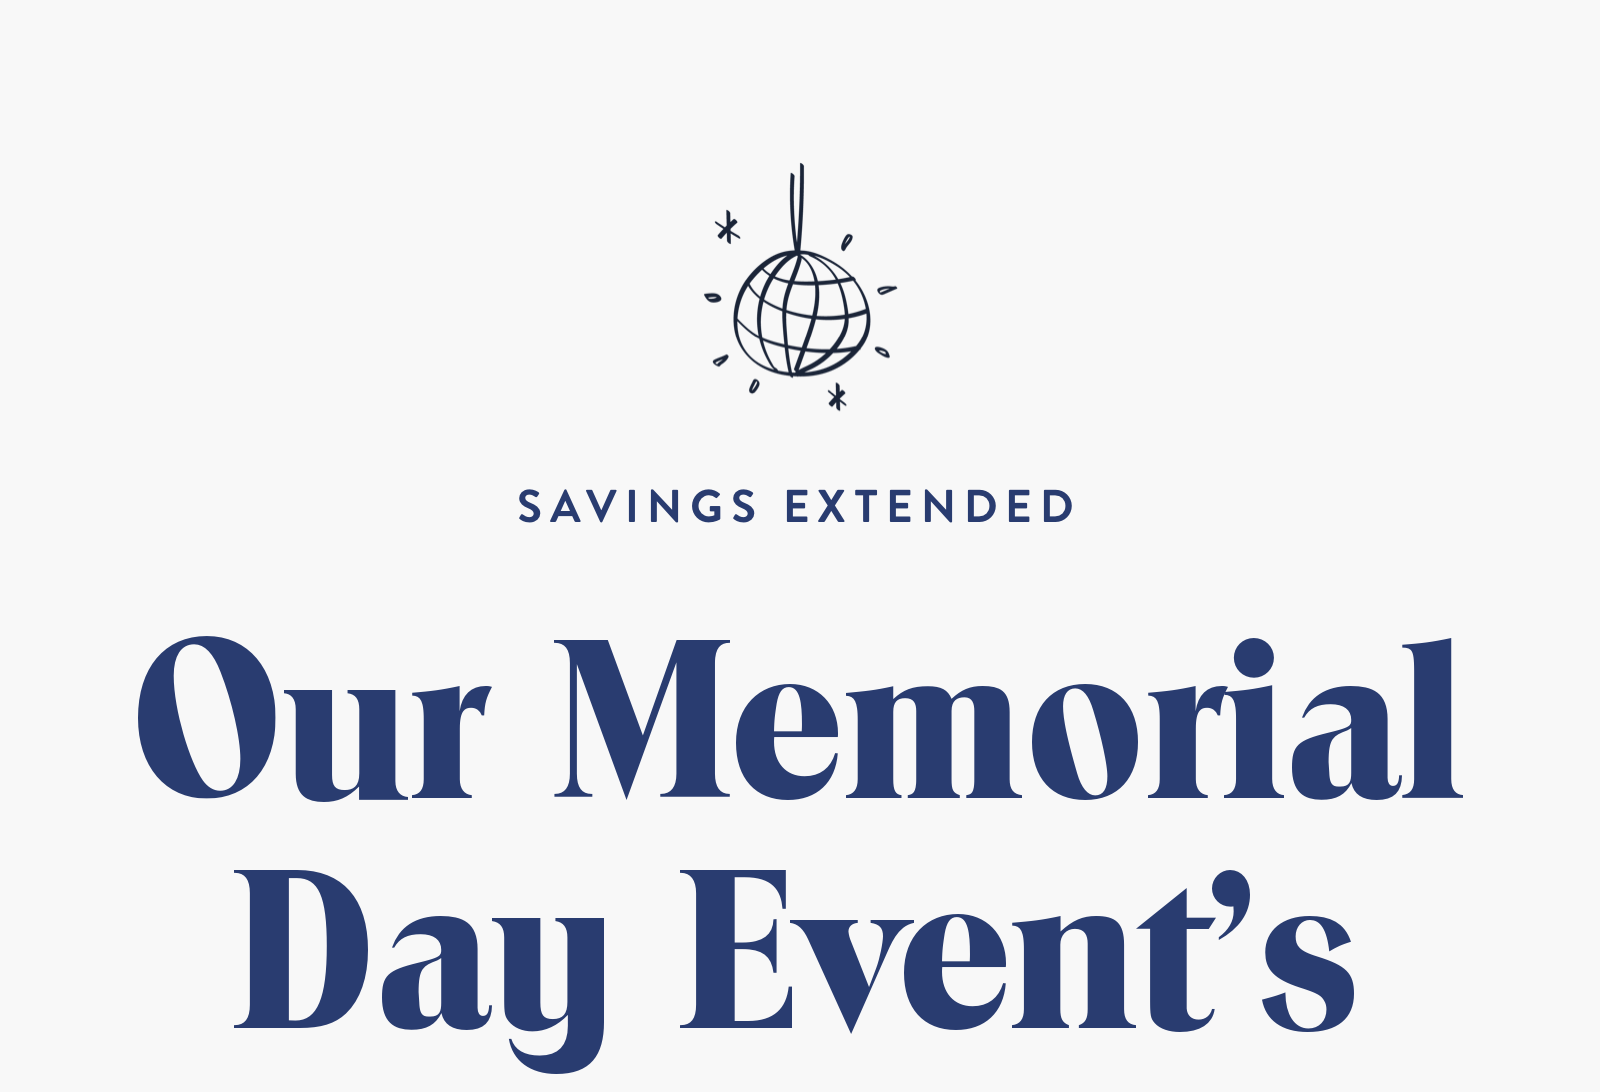 Our Memorial Day Event is Still Going!